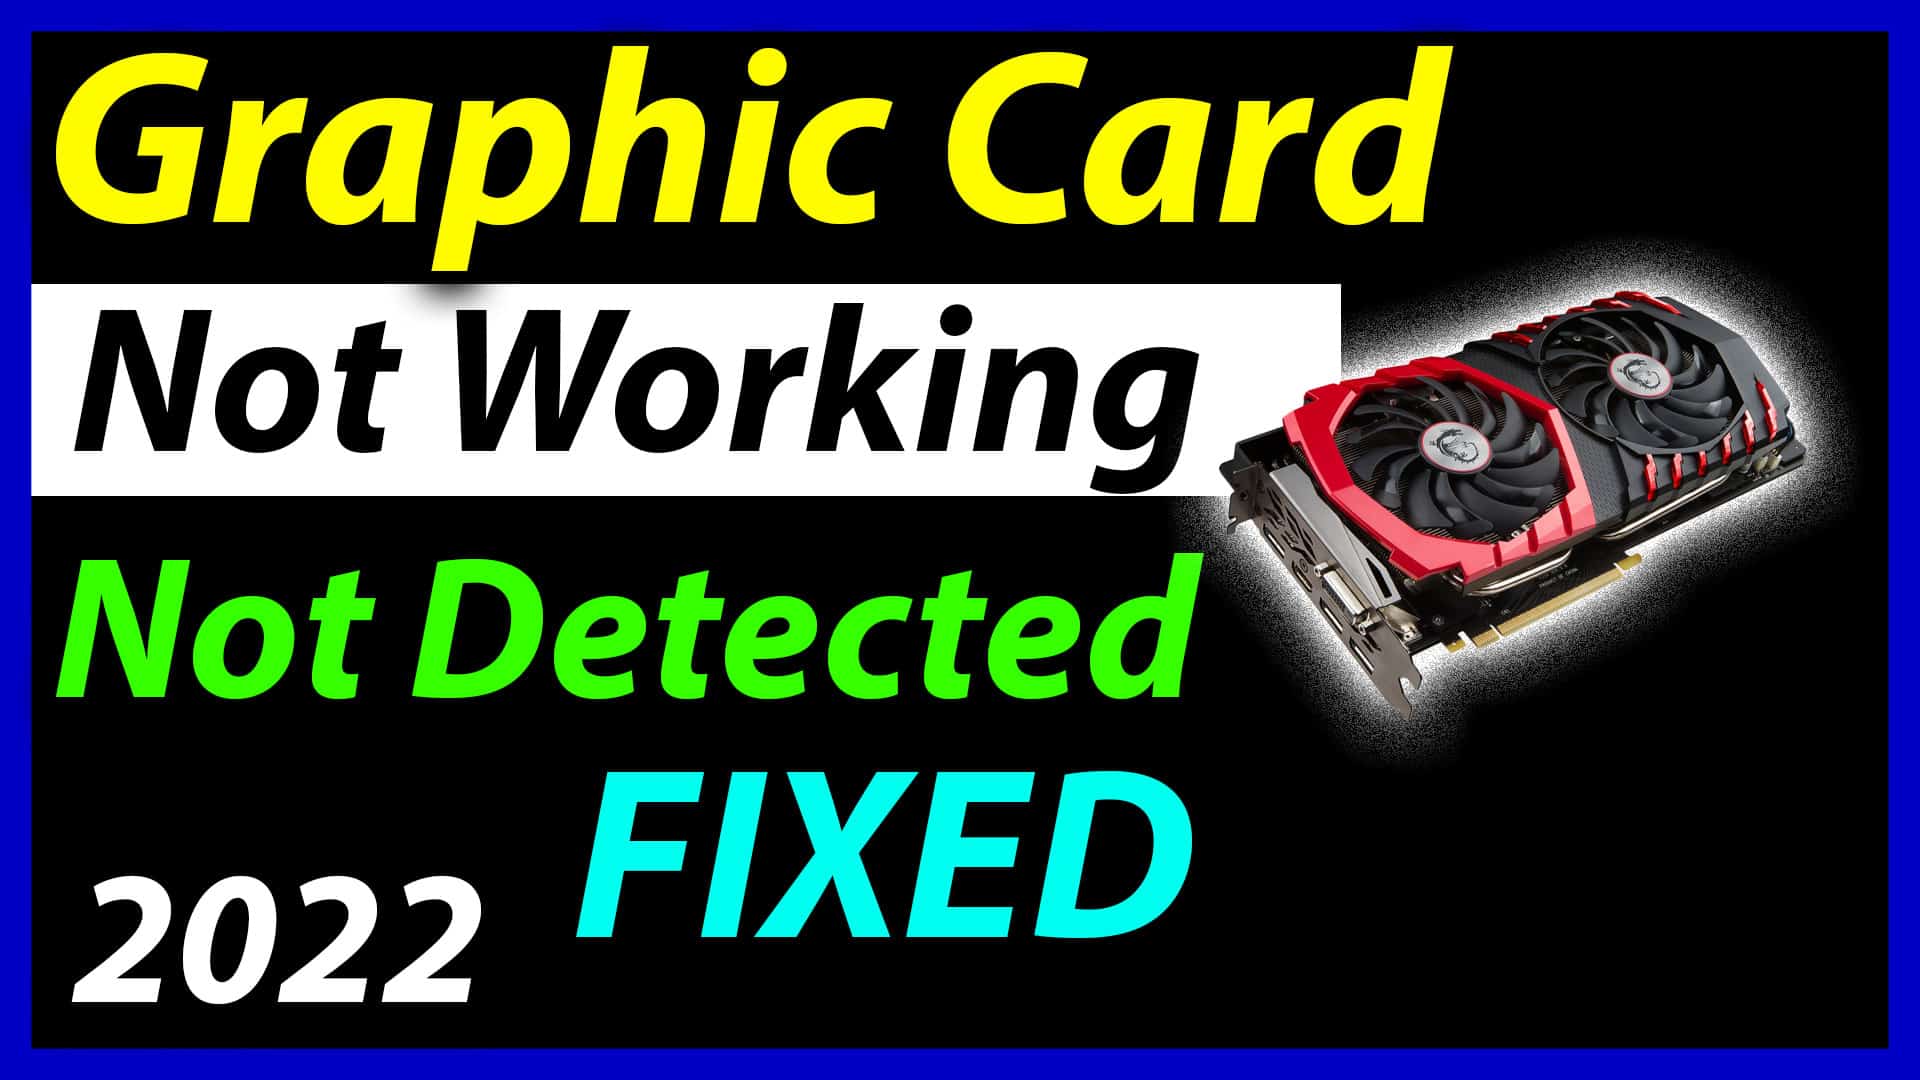 How to fix Graphic Card is not working or not Detected in Windows 11, 10, 8.1, 7